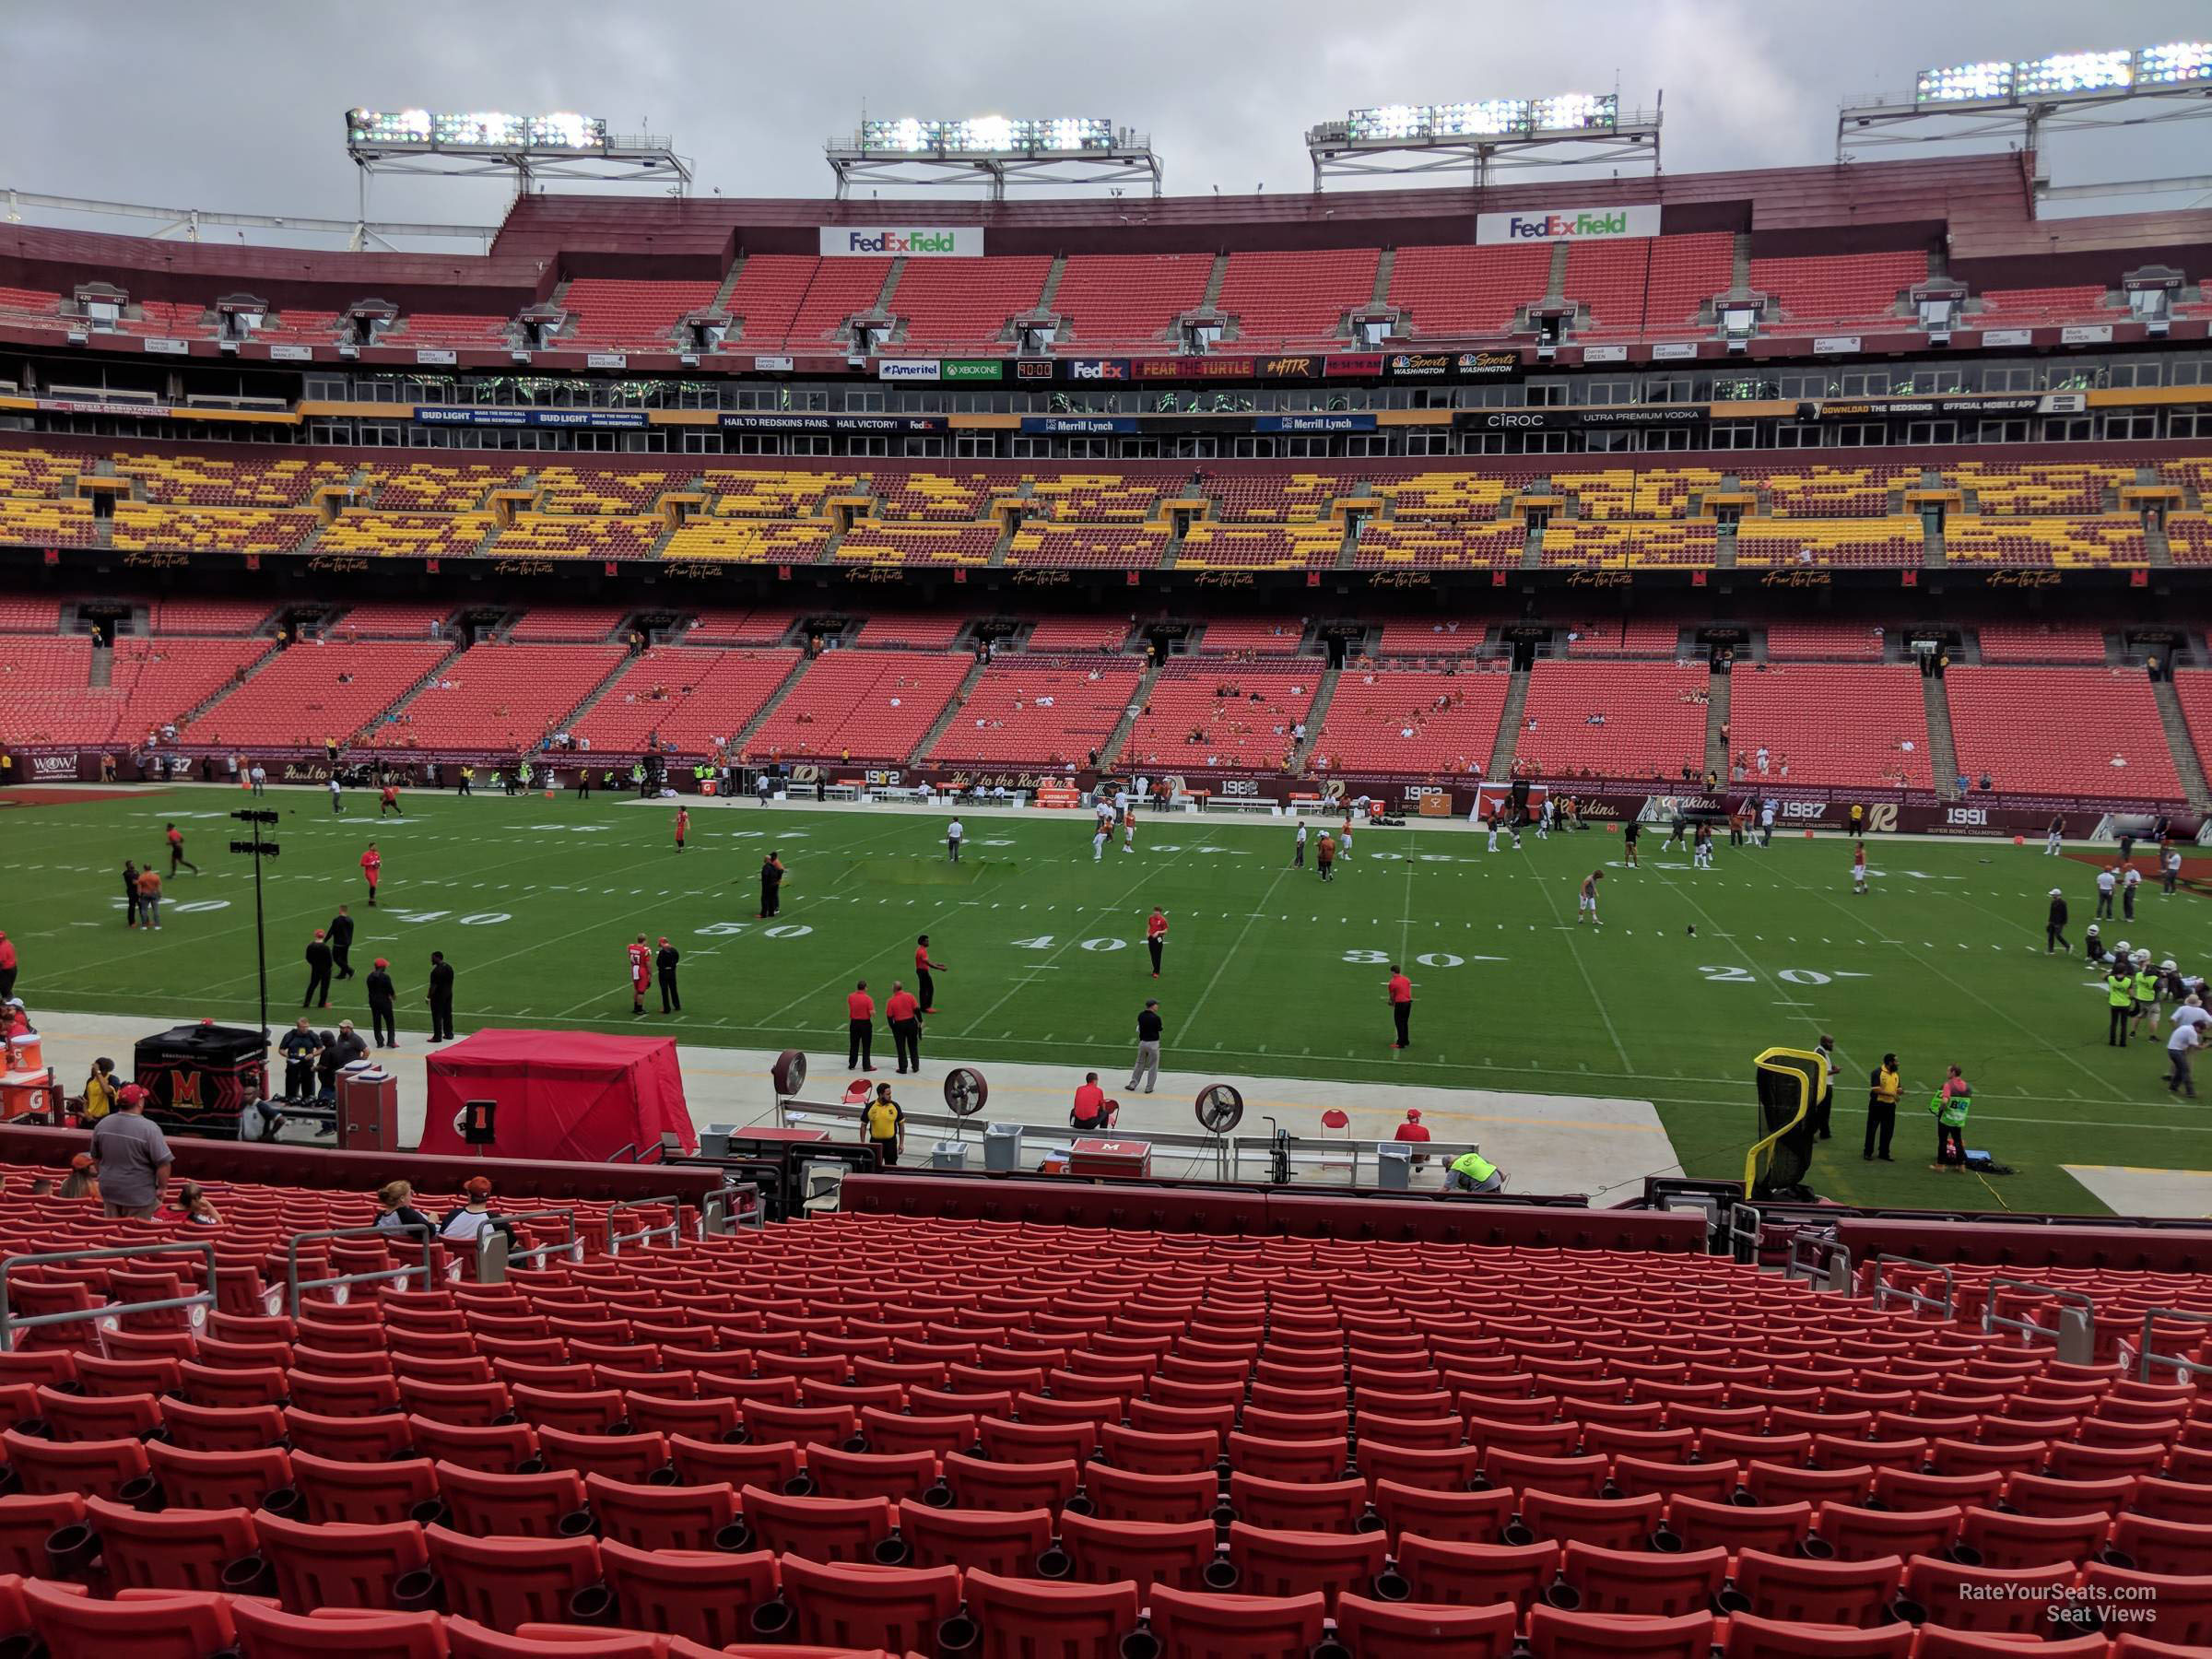 section 141, row 25 seat view  - fedexfield